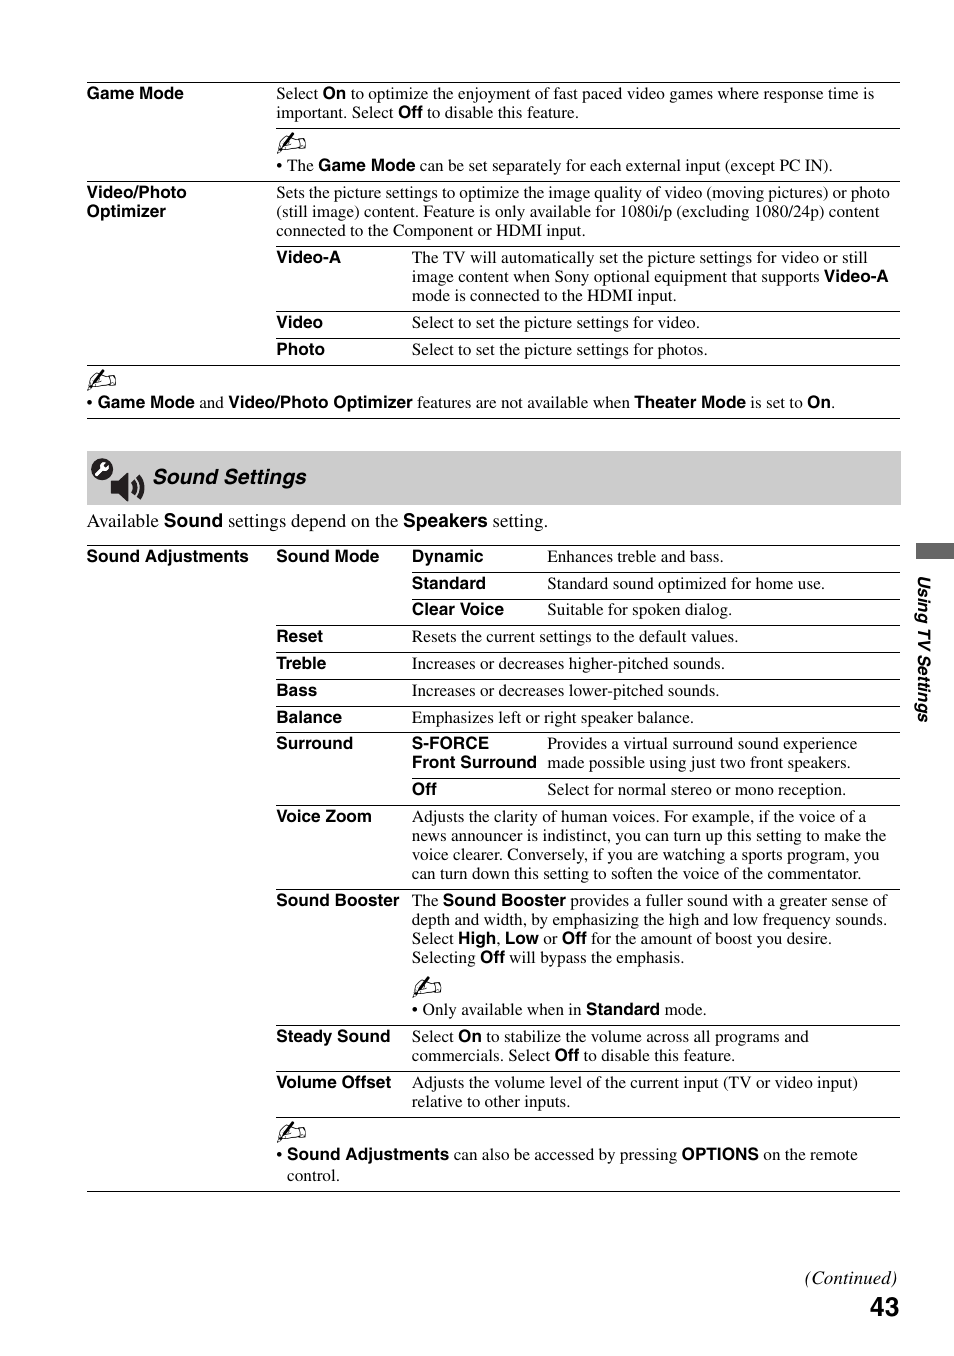 Sound settings | Sony KDL-52XBR7 User Manual | Page 43 / 60